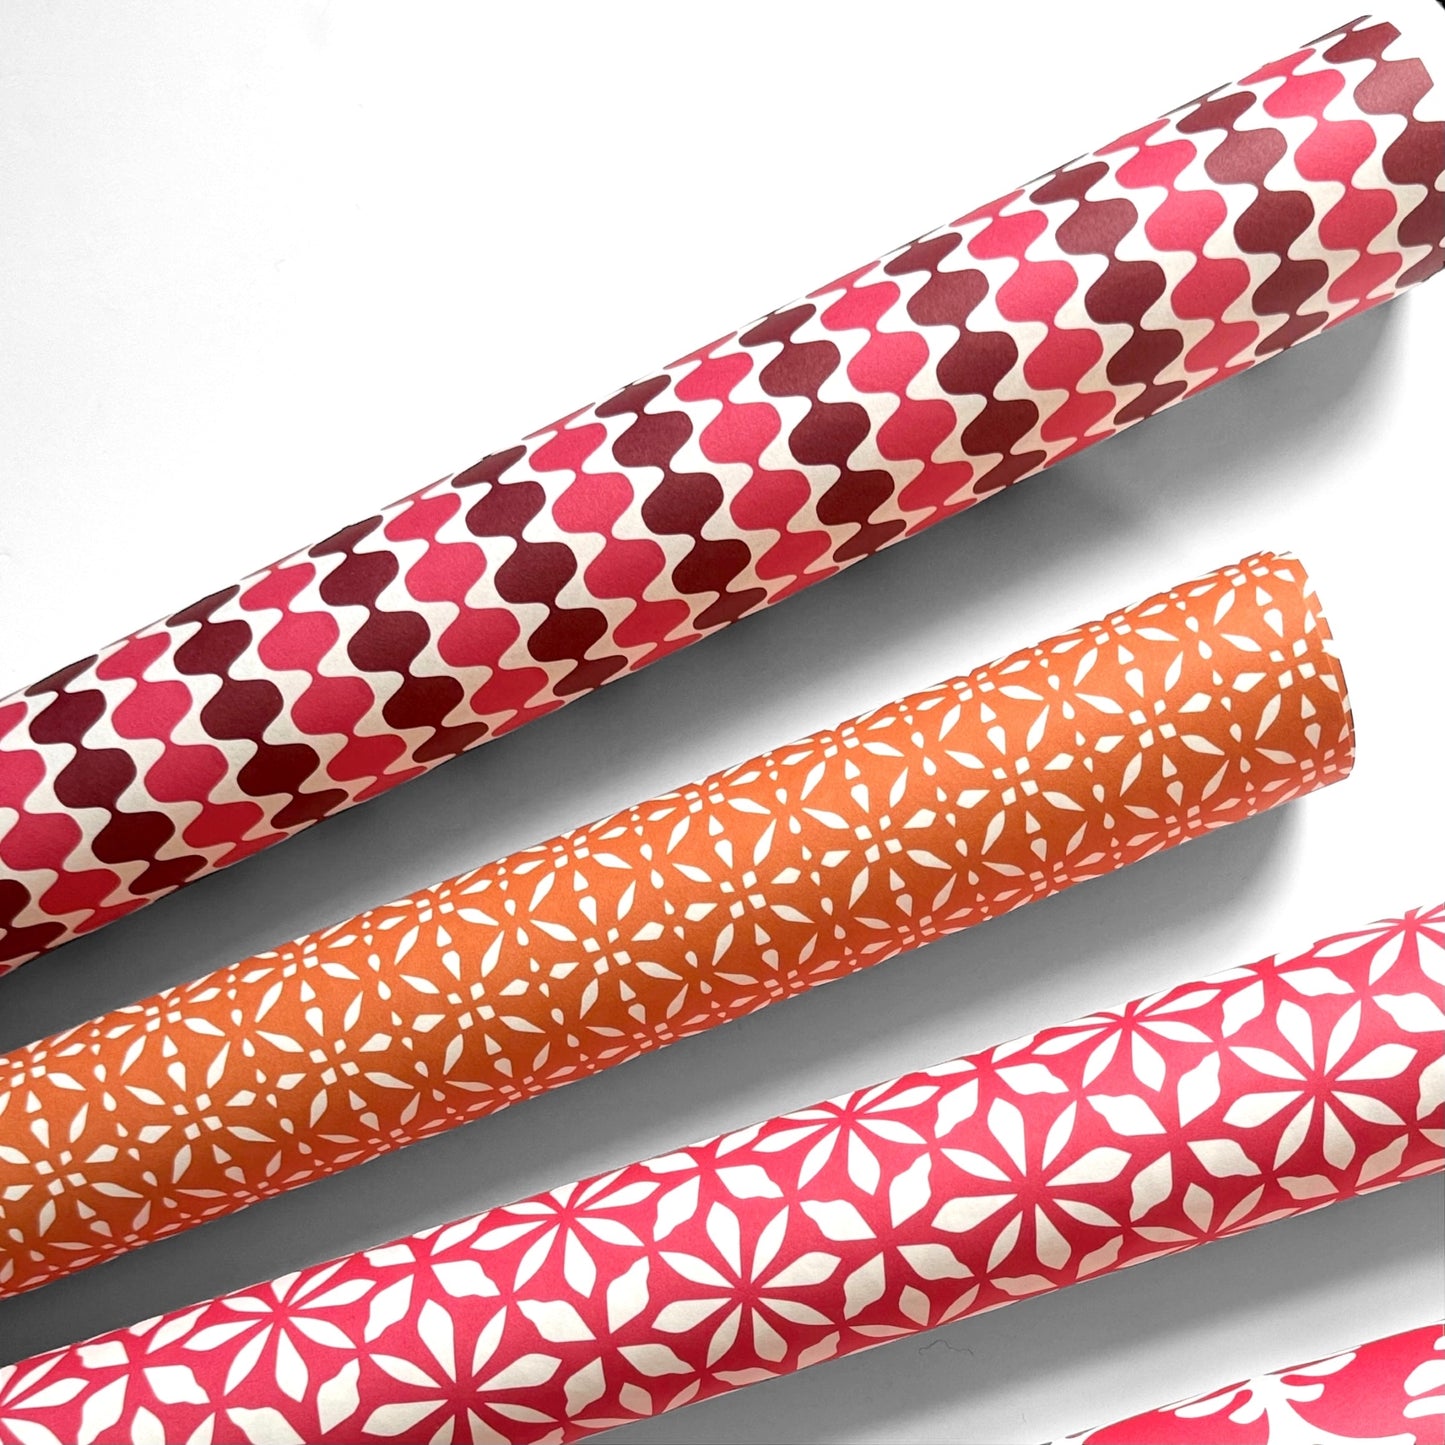 wrapping paper by Otto Editions with a cut-out wavy design in white on a pink and burgundy background. Pictured rolled alongside other designs